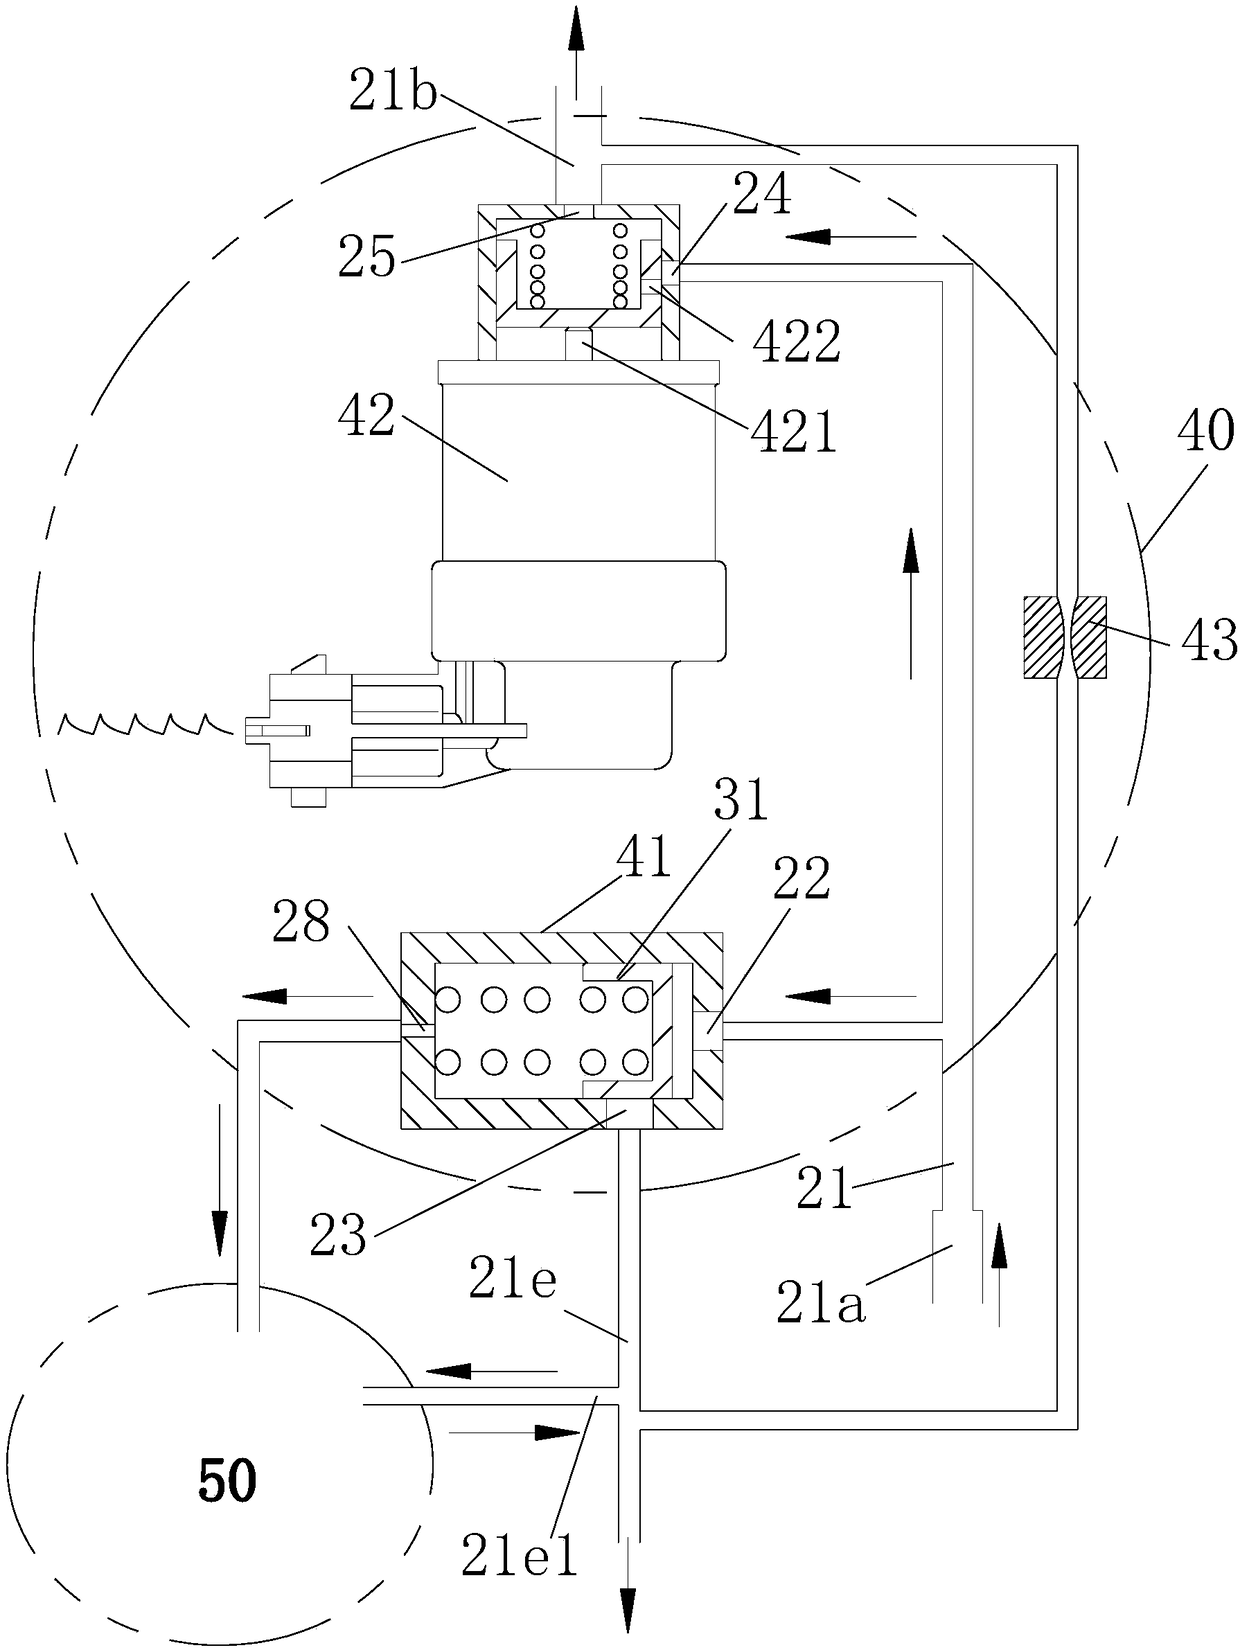 Electronically controlled low pressure fuel gauge for internal combustion engines